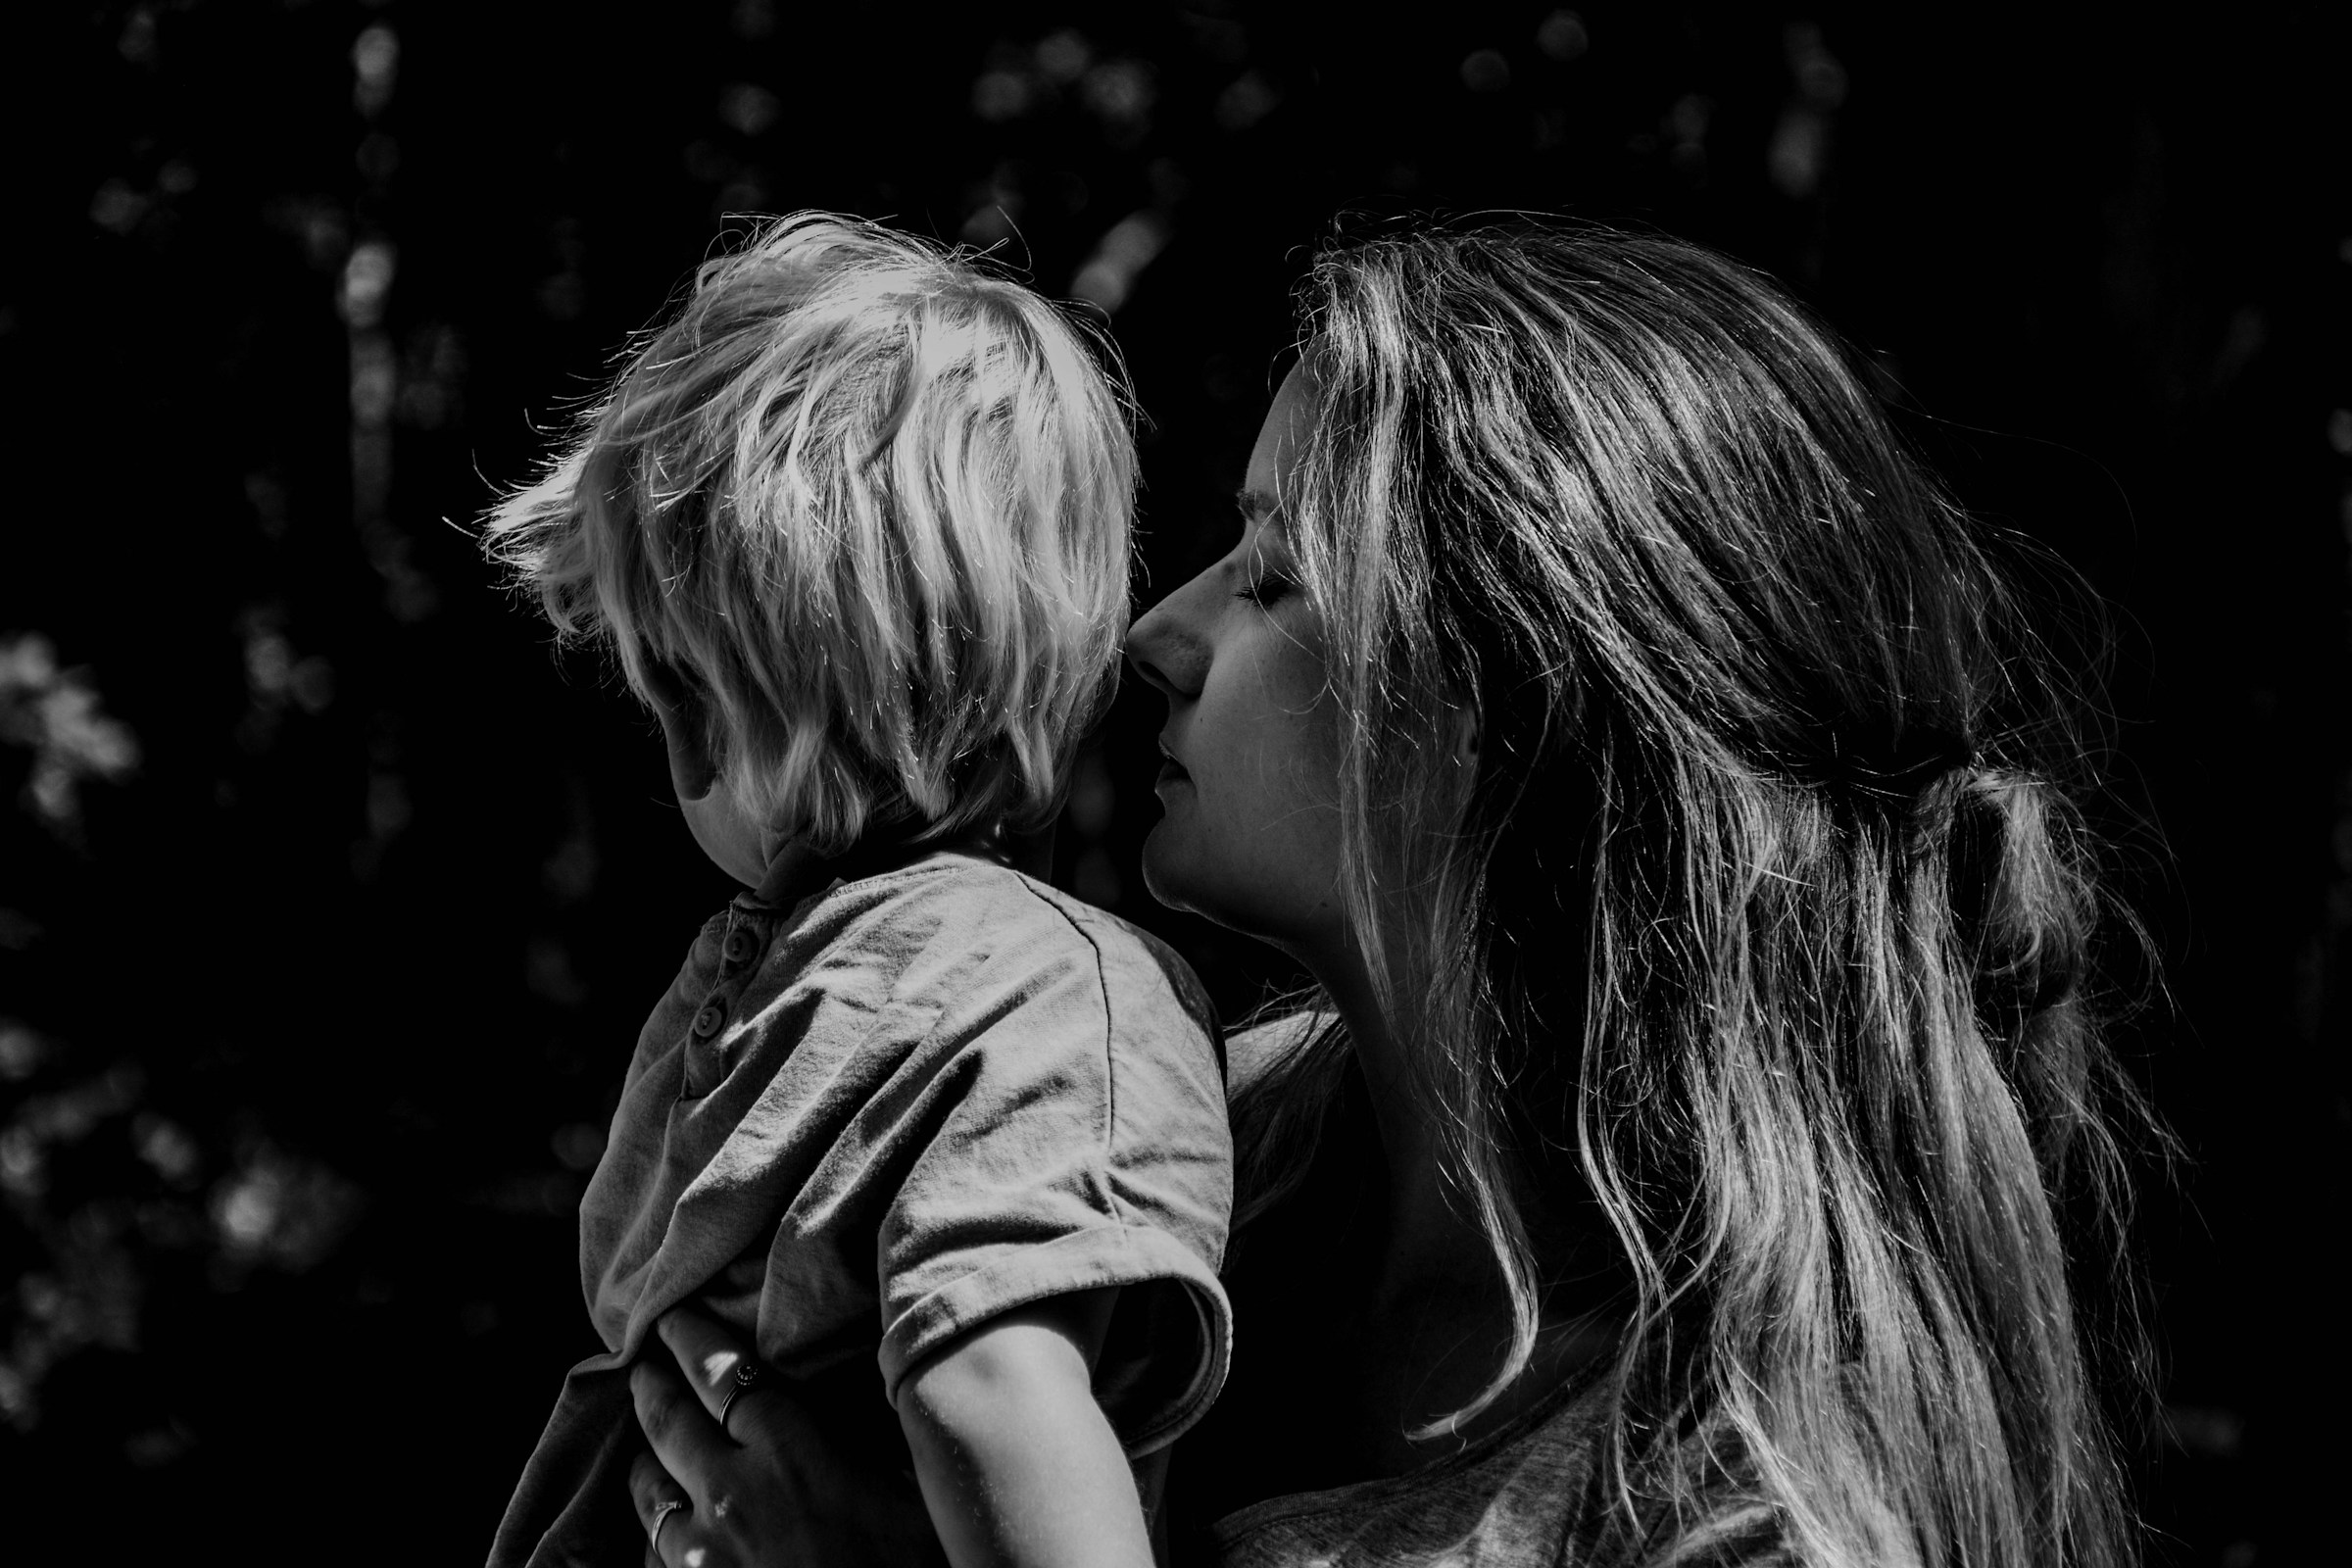 A young woman with a little boy | Source: Unsplash